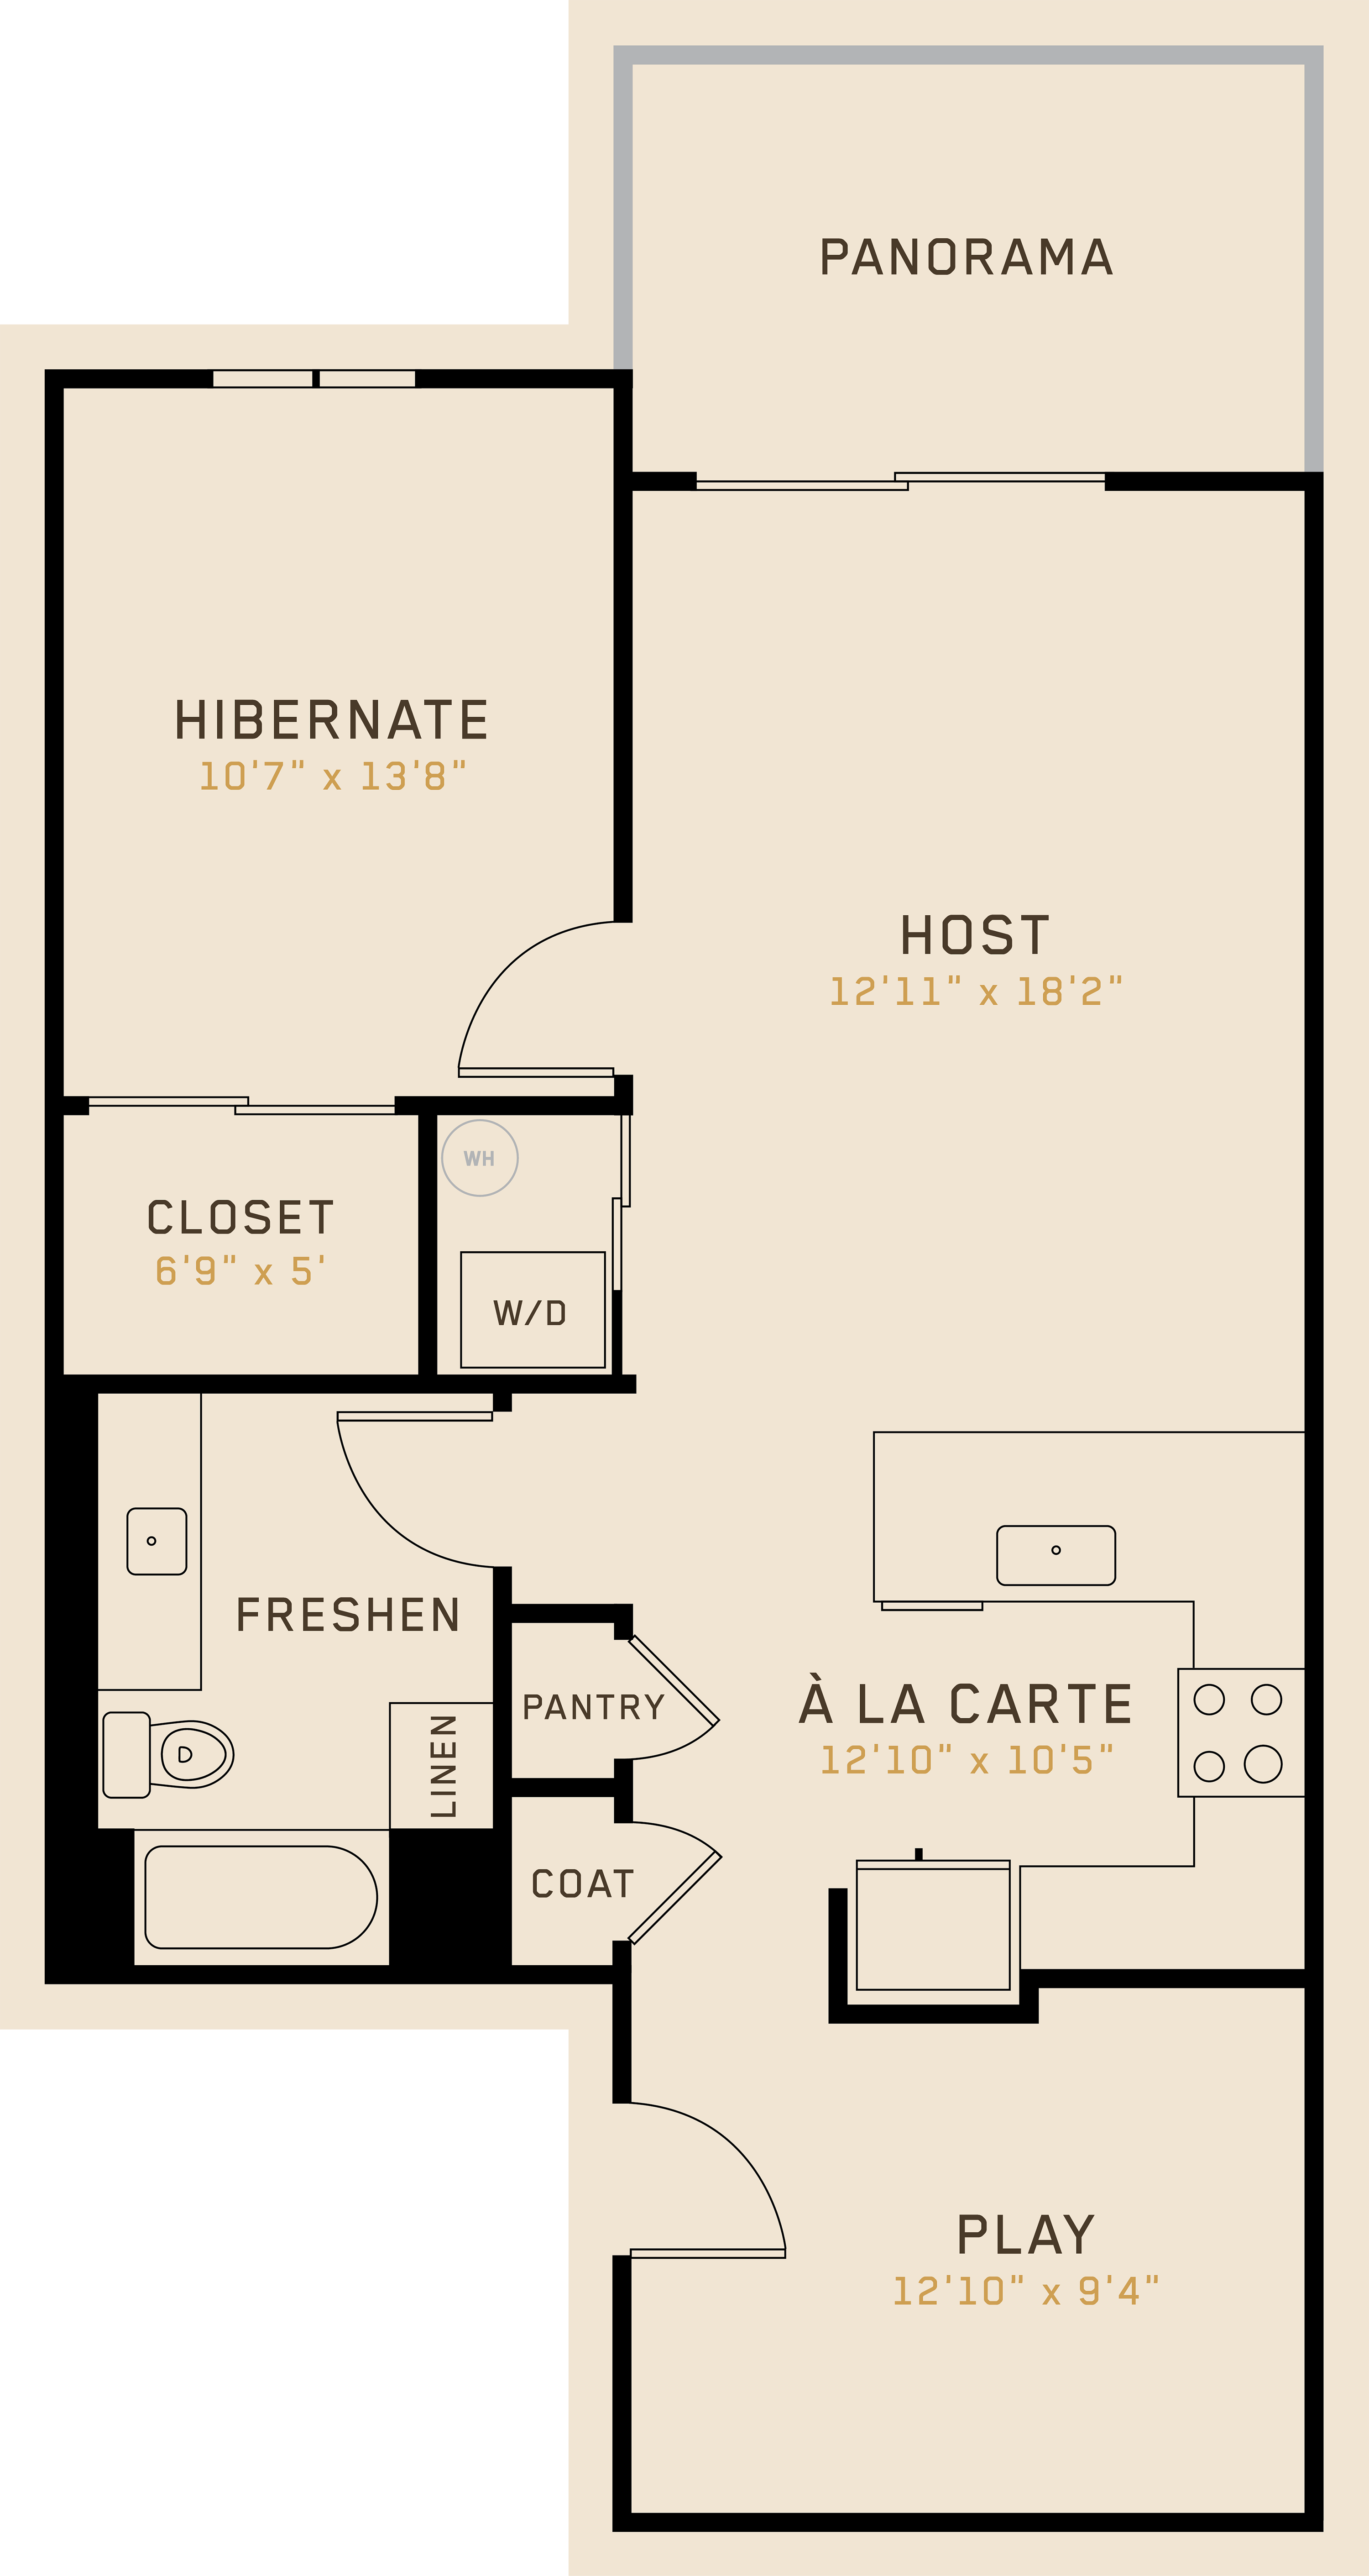 A1M floor plan featuring 1 bedroom, 1 bathroom, and is 899 square feet